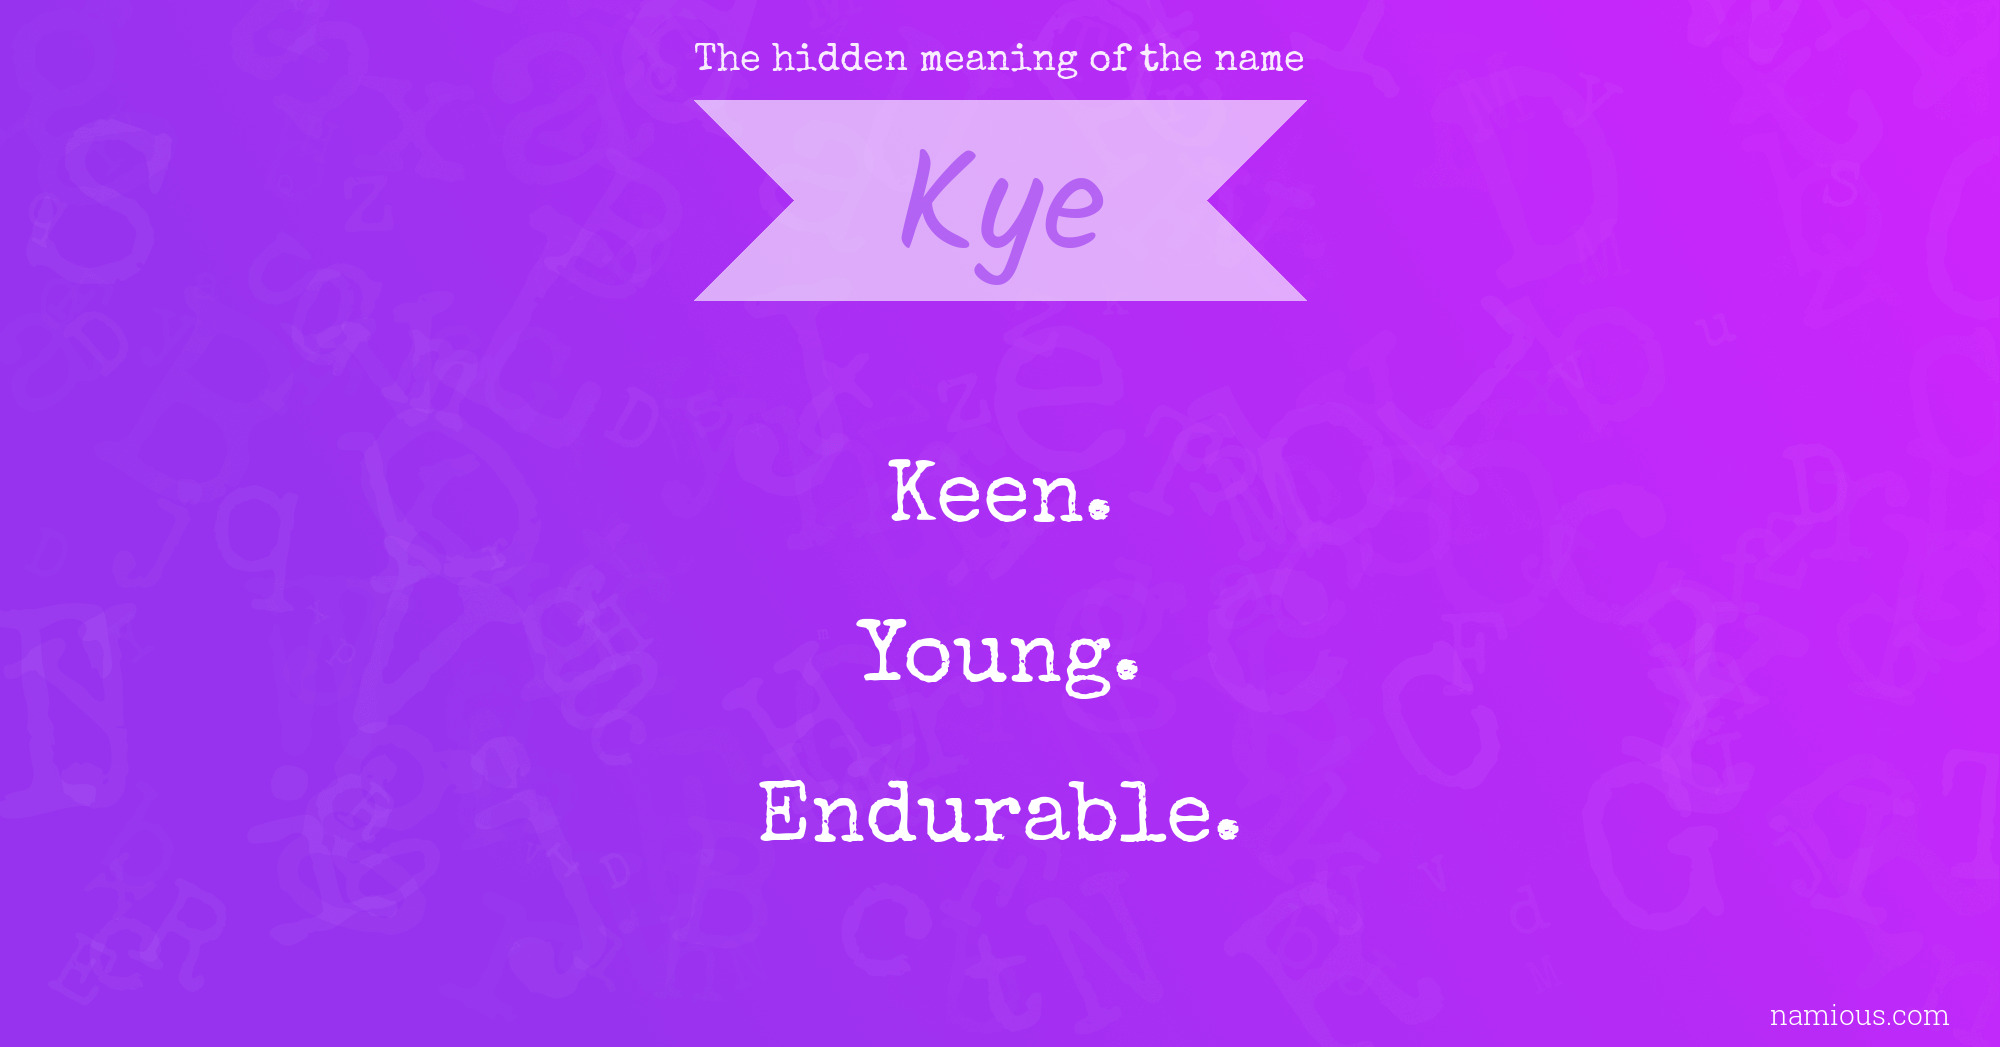 The hidden meaning of the name Kye